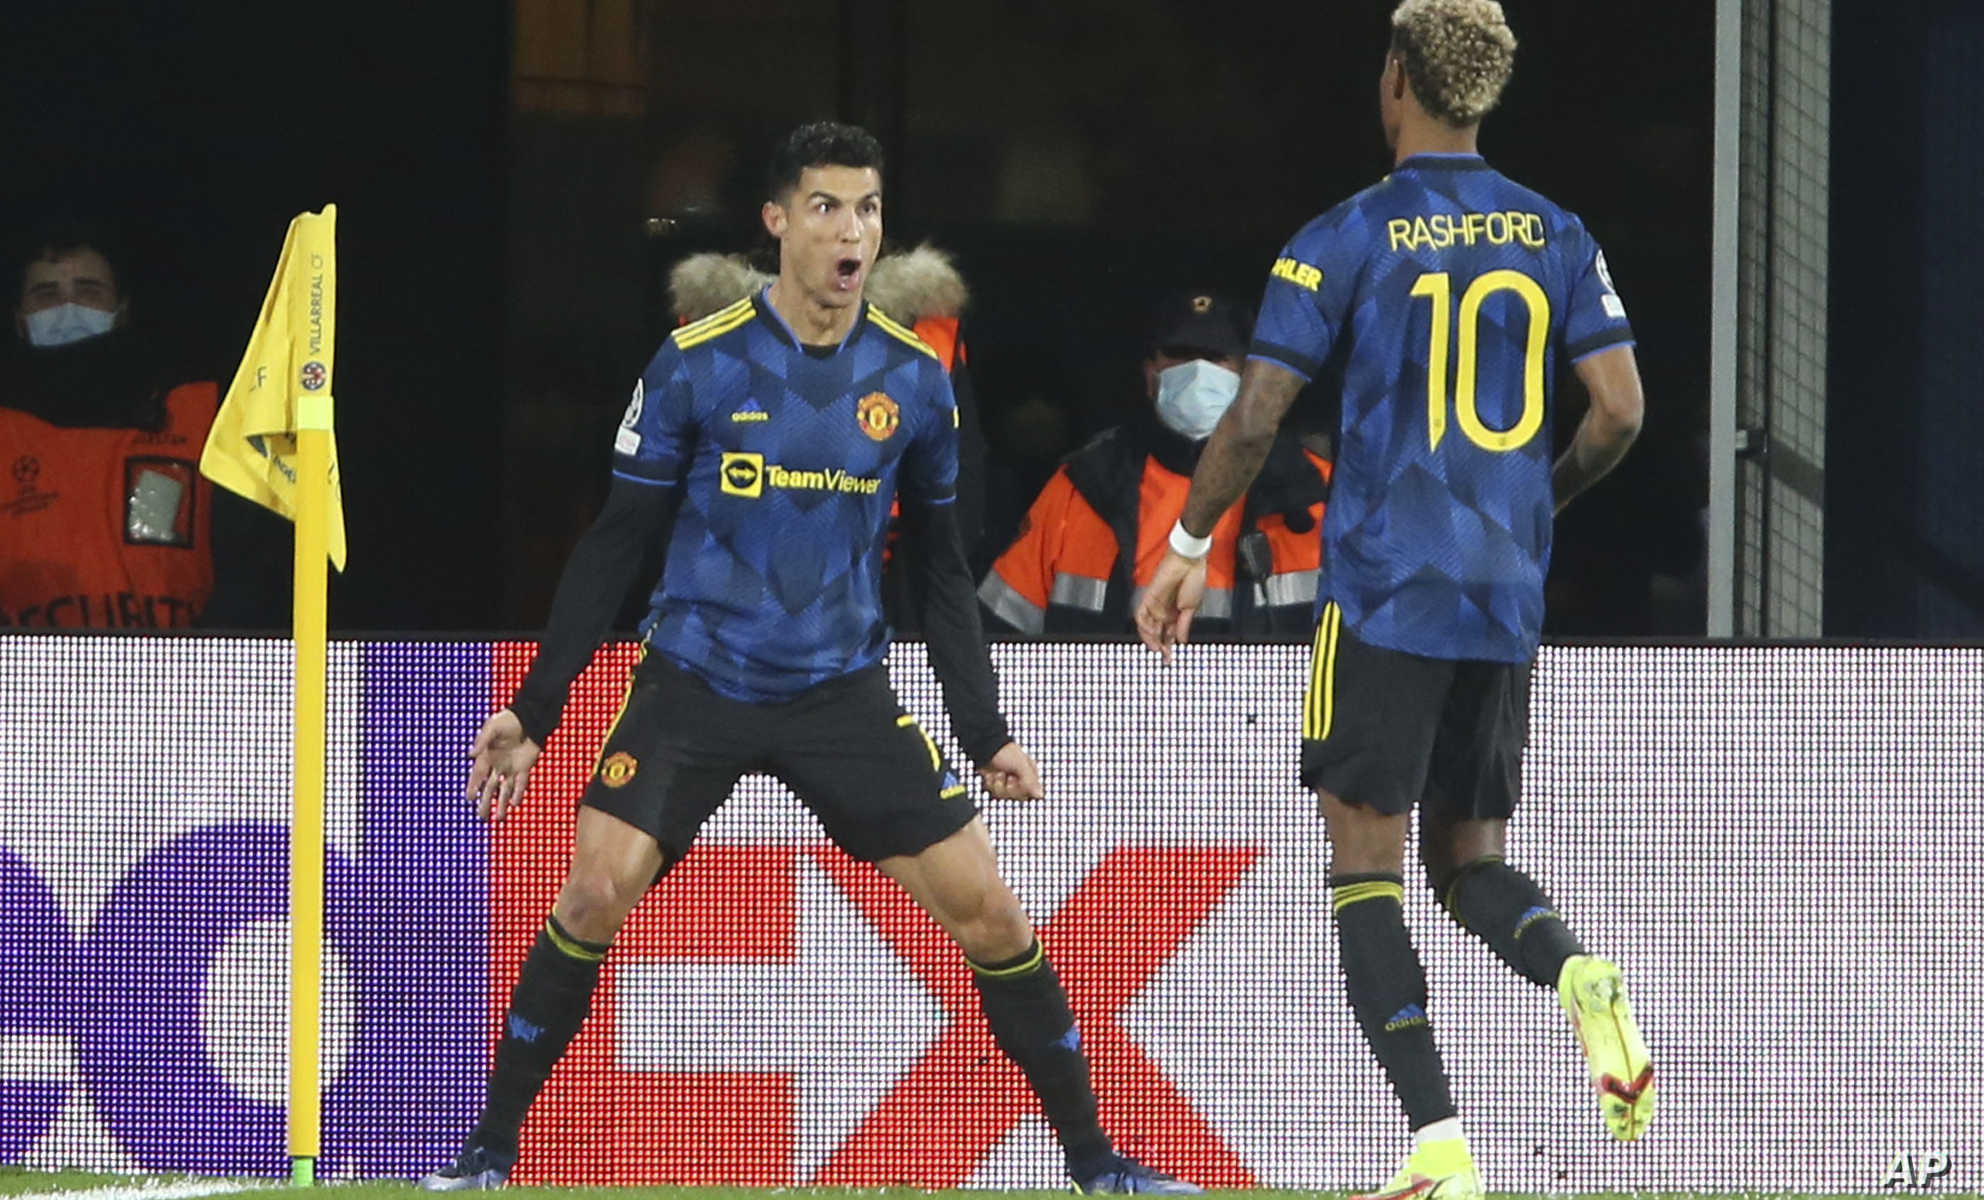 Manchester United's Cristiano Ronaldo, left, celebrates with Marcus Rashford after scoring the opening goal during a Group F Champions League soccer match between Villarreal and Manchester United at the Ceramica stadium in Villarreal, Spain, Tuesday, Nov. 23, 2021. (AP Photo/Alberto Saiz)